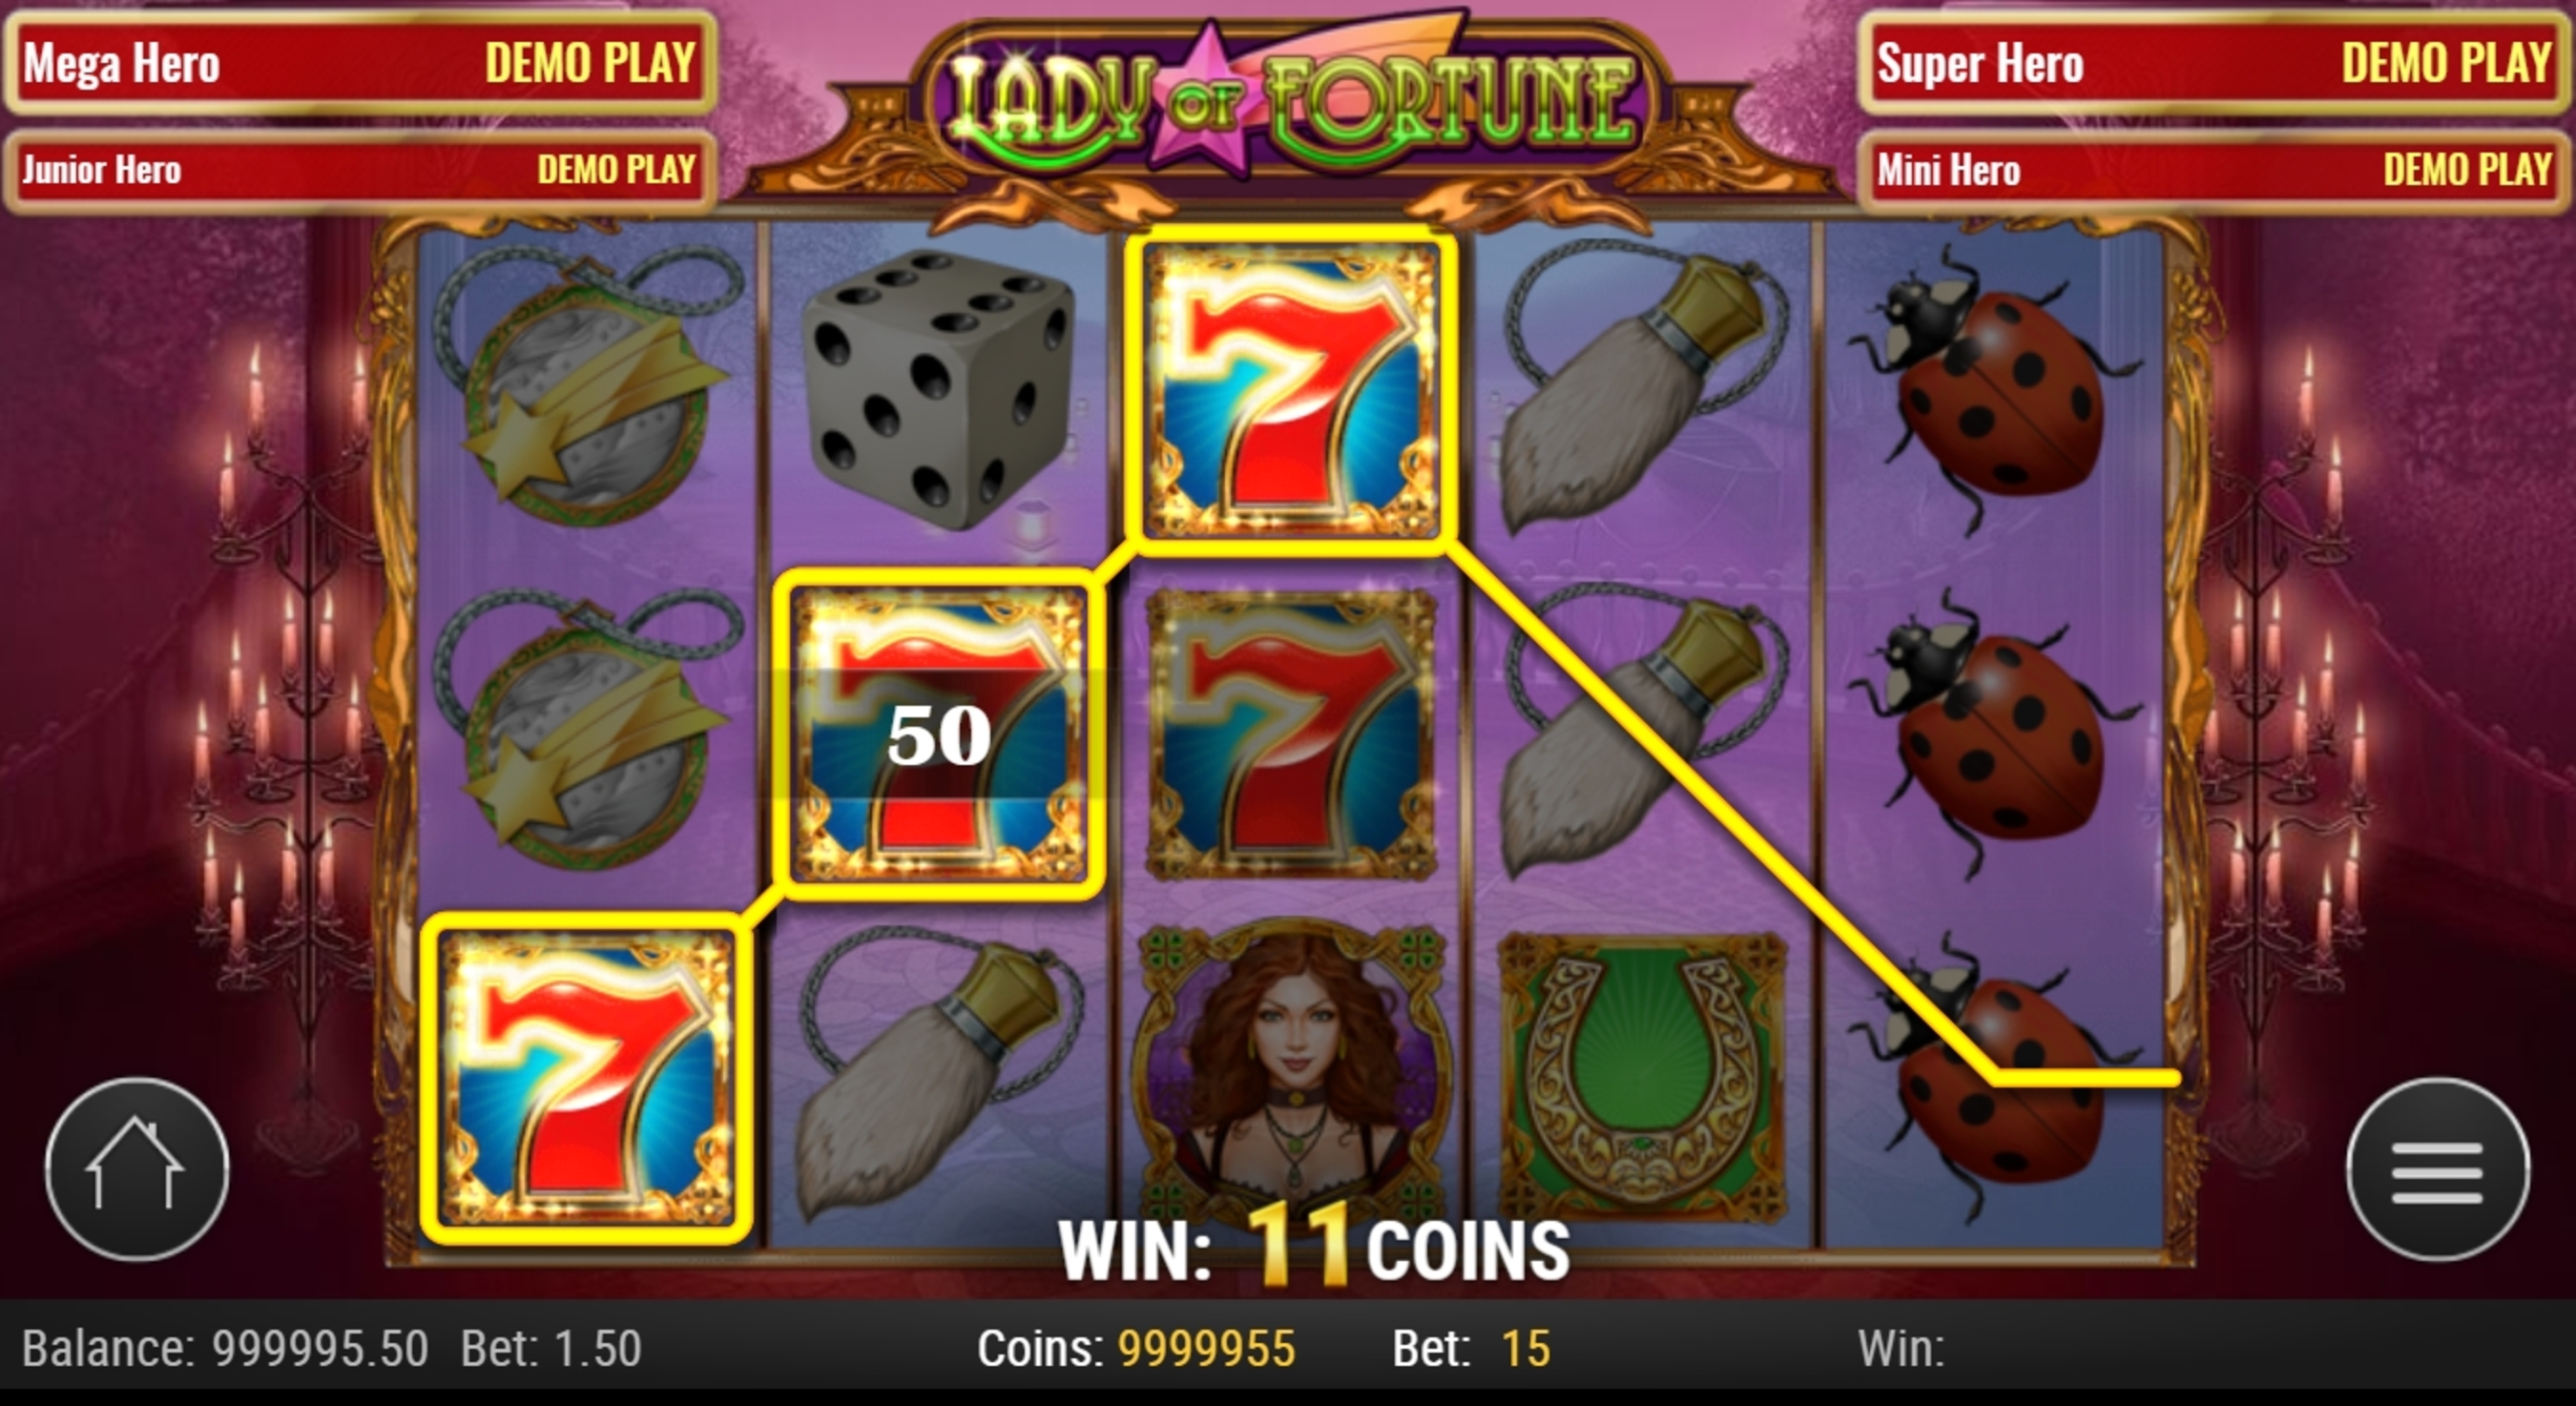 Win Money in Lady of Fortune Free Slot Game by Playn GO